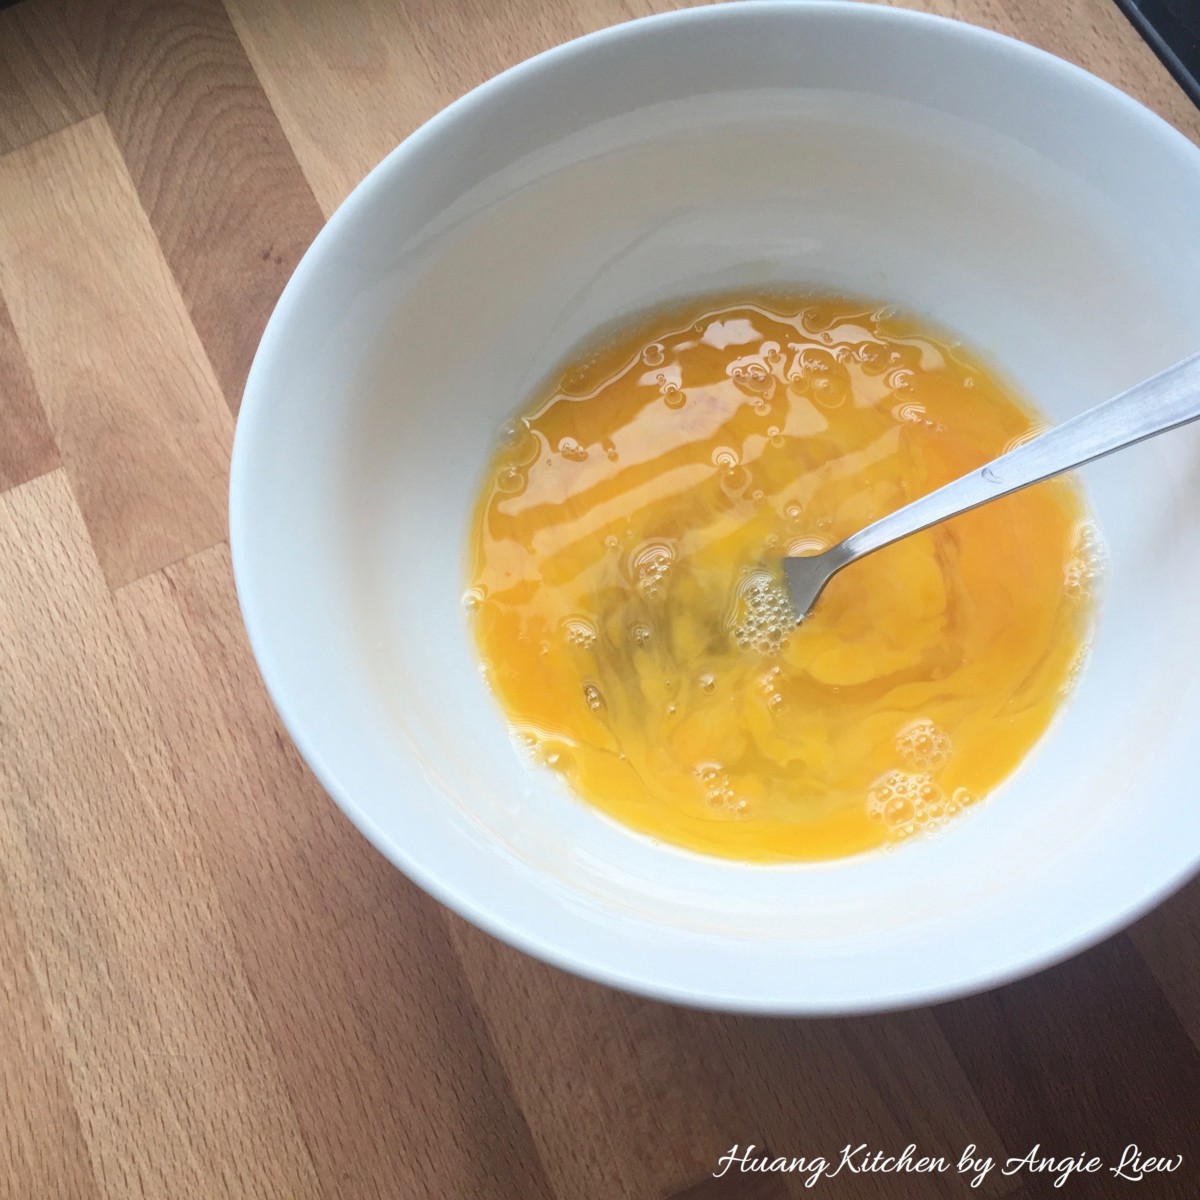 Steamed Egg Pudding Recipe - beat eggs